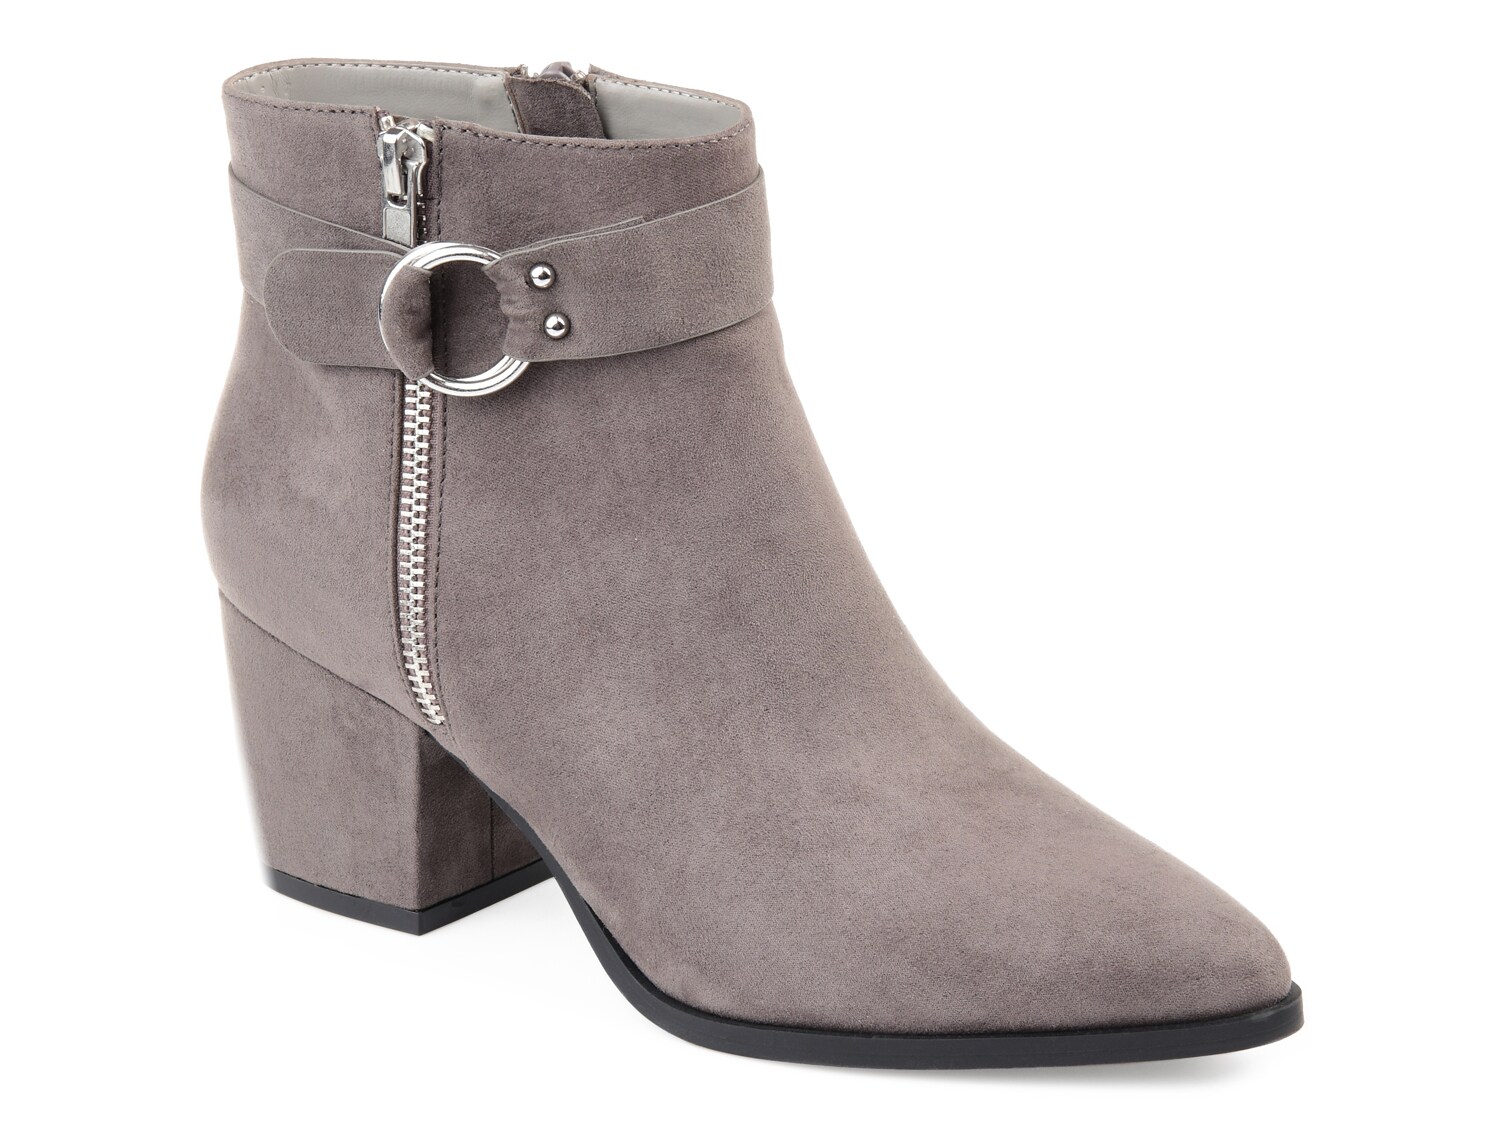 Journee Collection Lavra Bootie - Free Shipping | DSW